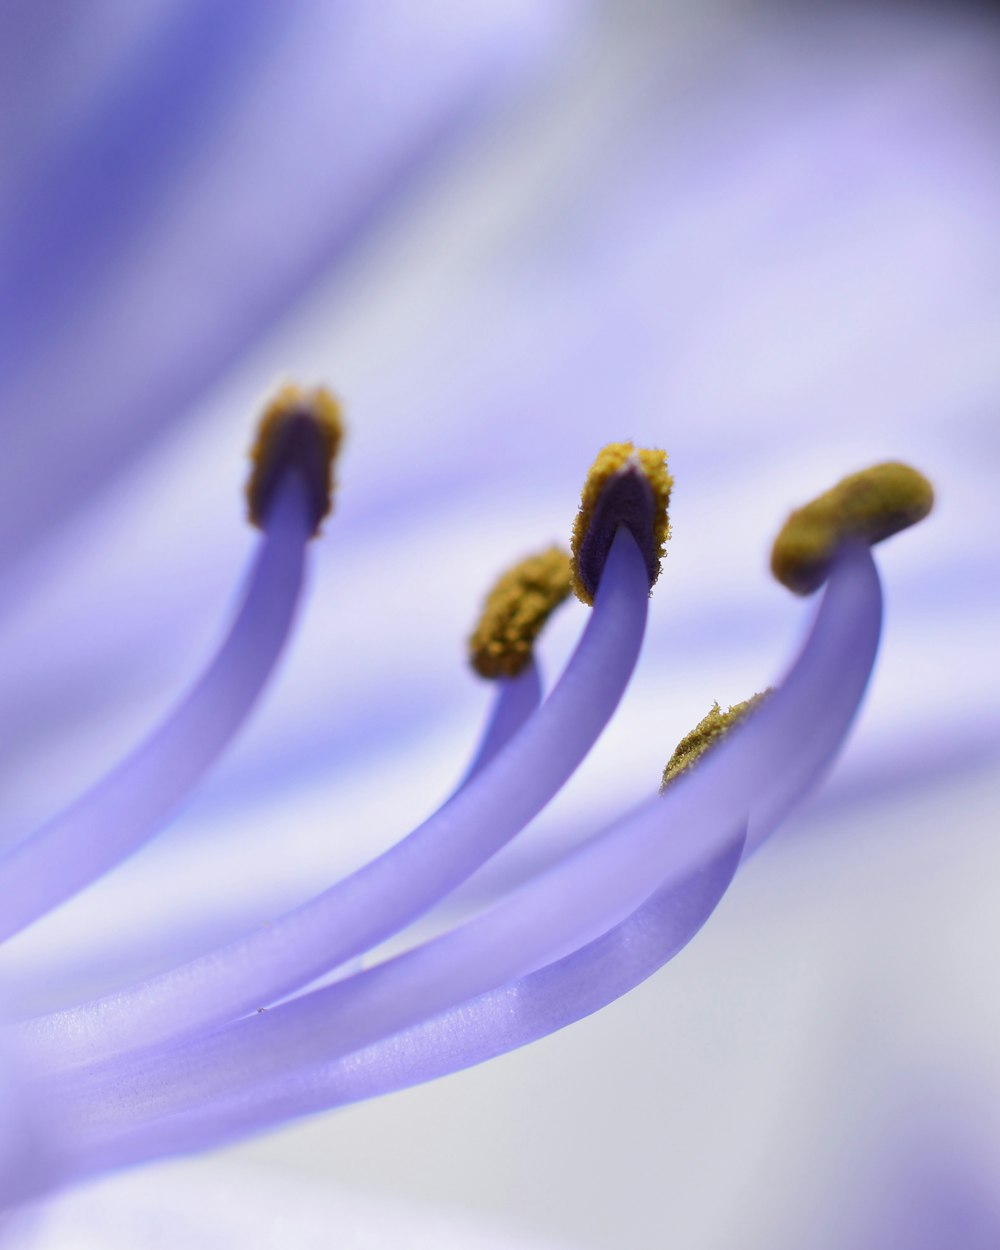 a close up view of a purple flower